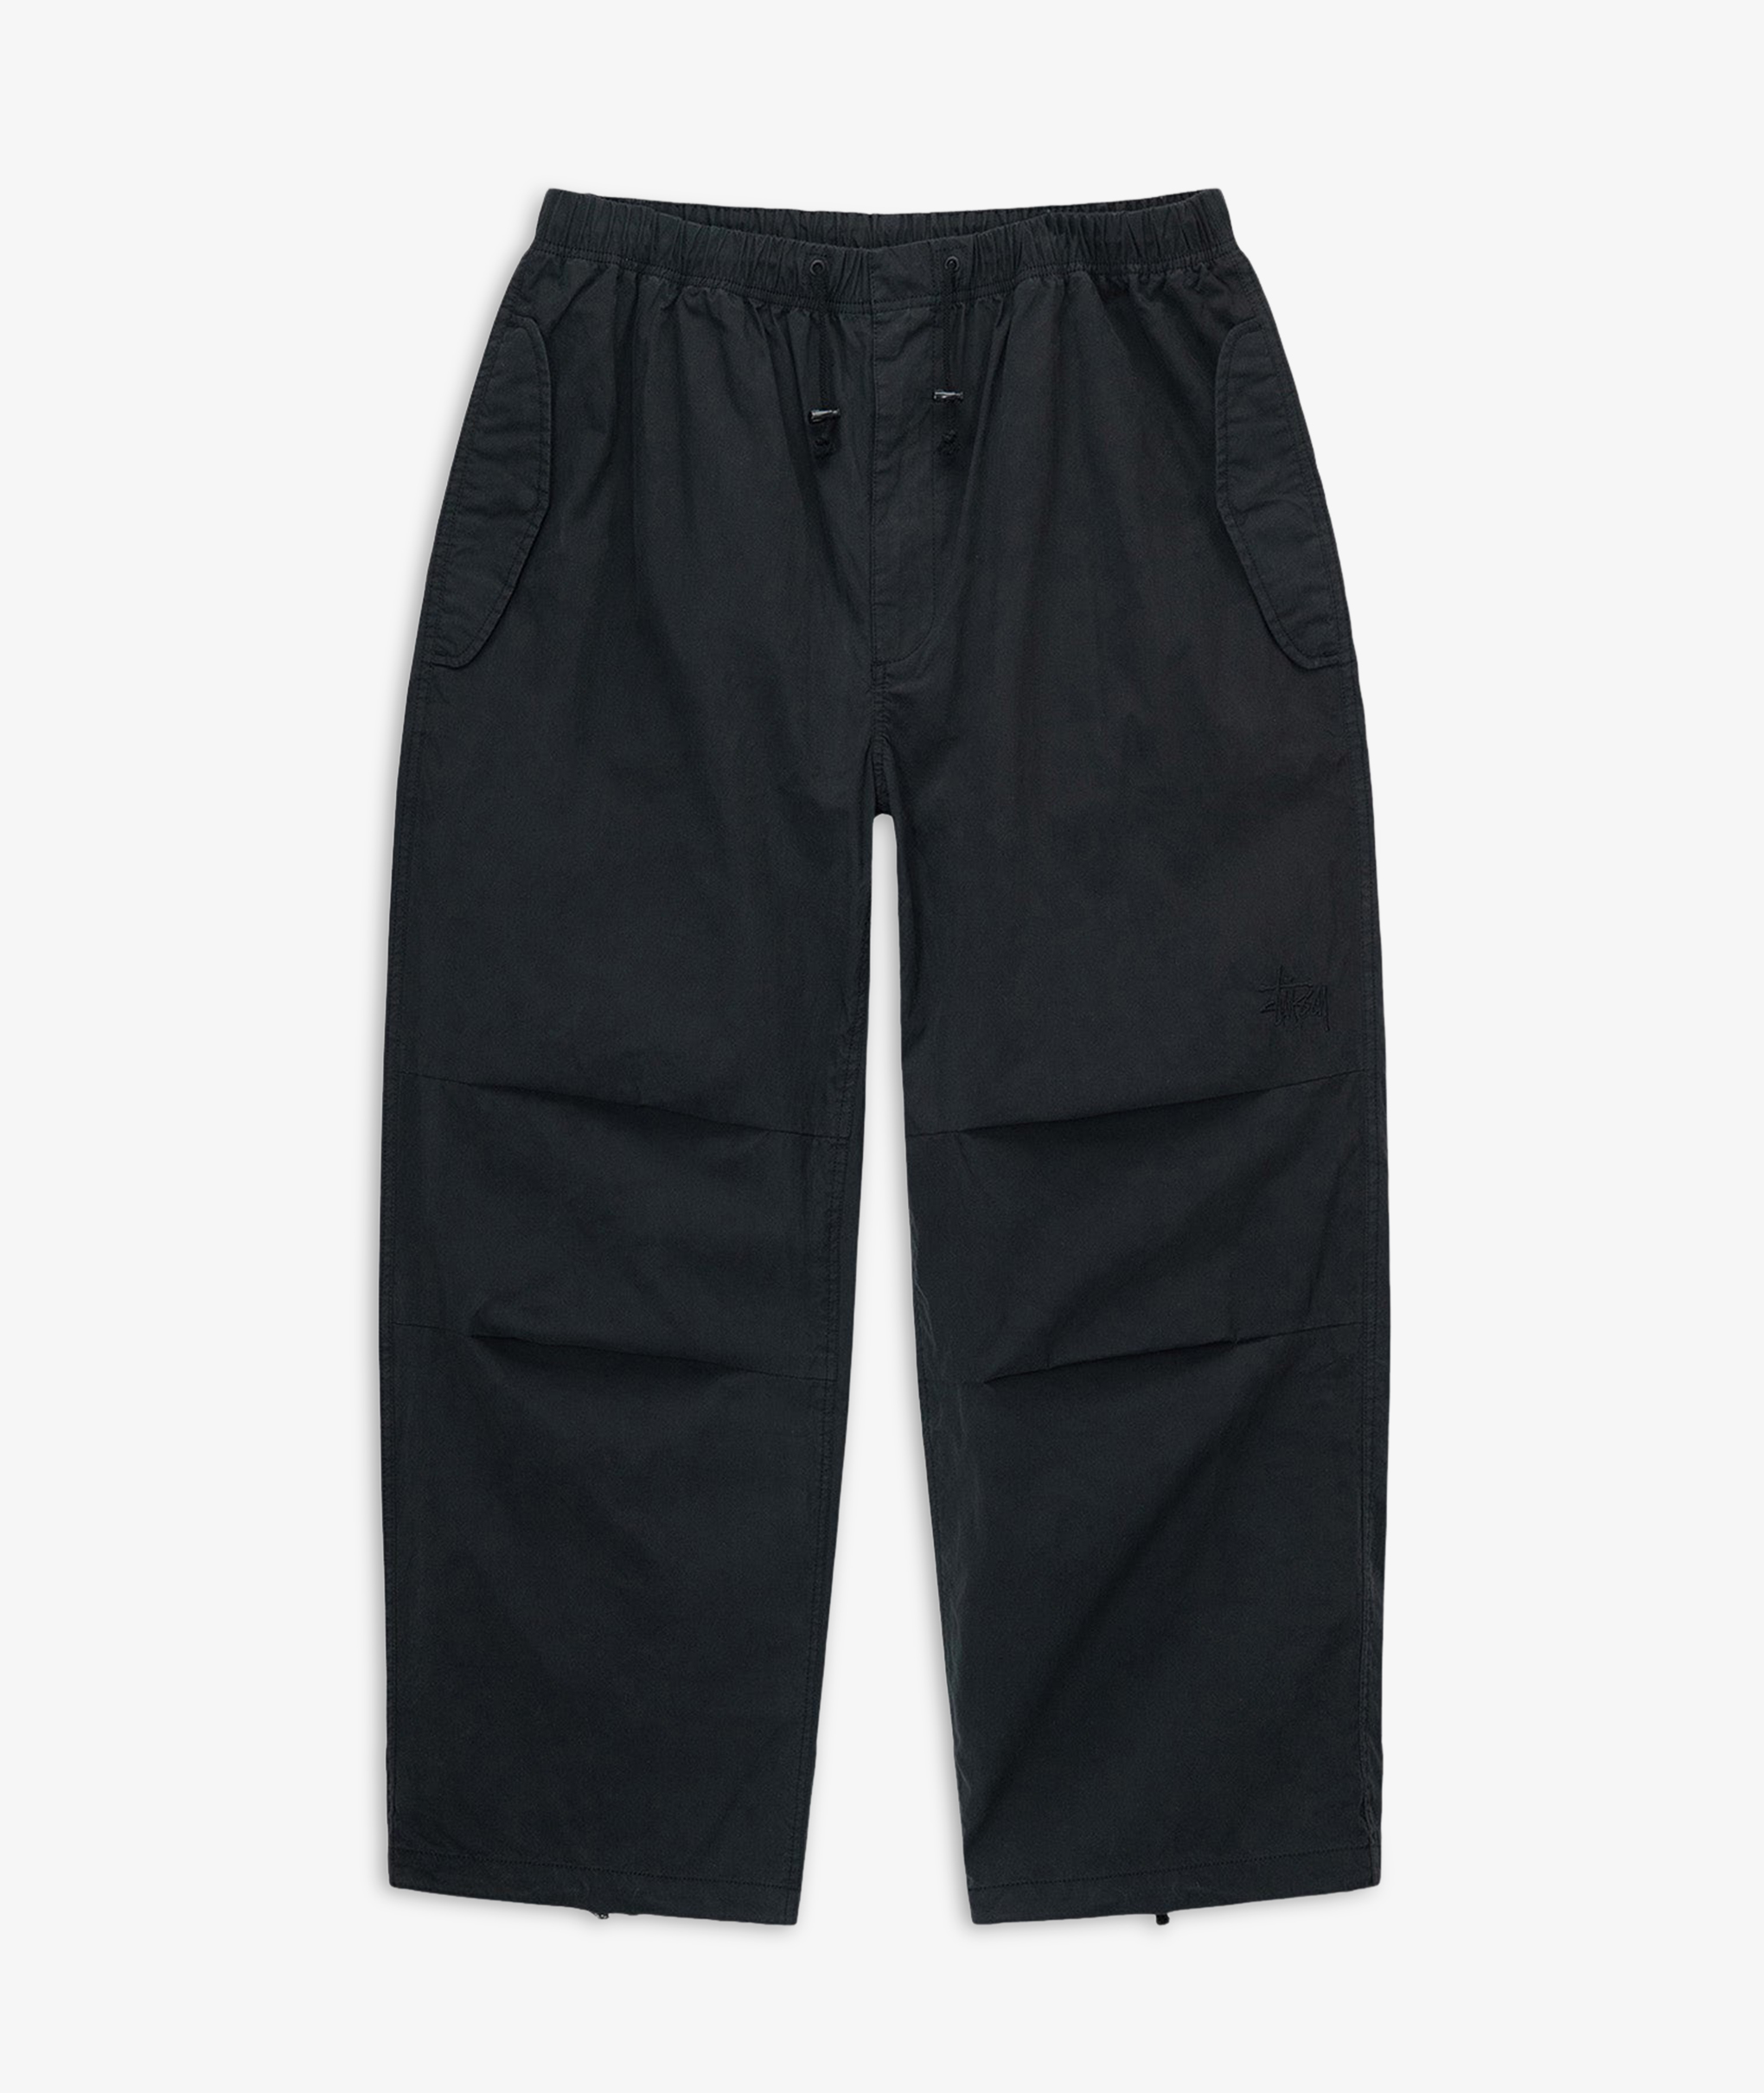 Norse Store | Shipping Worldwide - Stüssy Nyco Over Trousers - Black